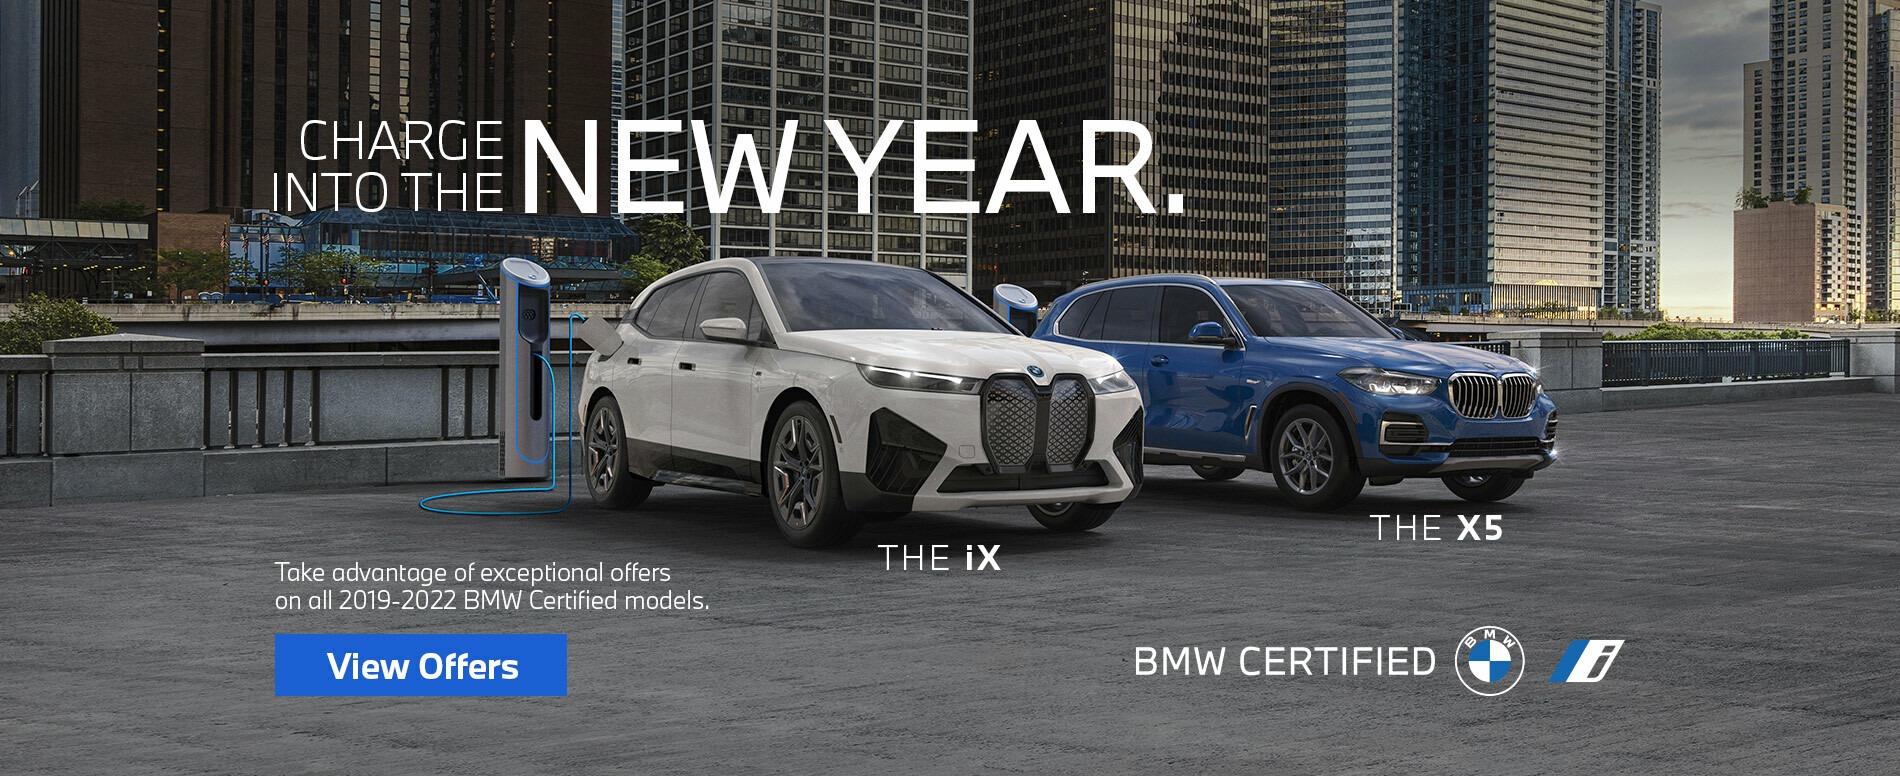 Take advantage of exceptional offers on all 2019-2022 BMW Certified models